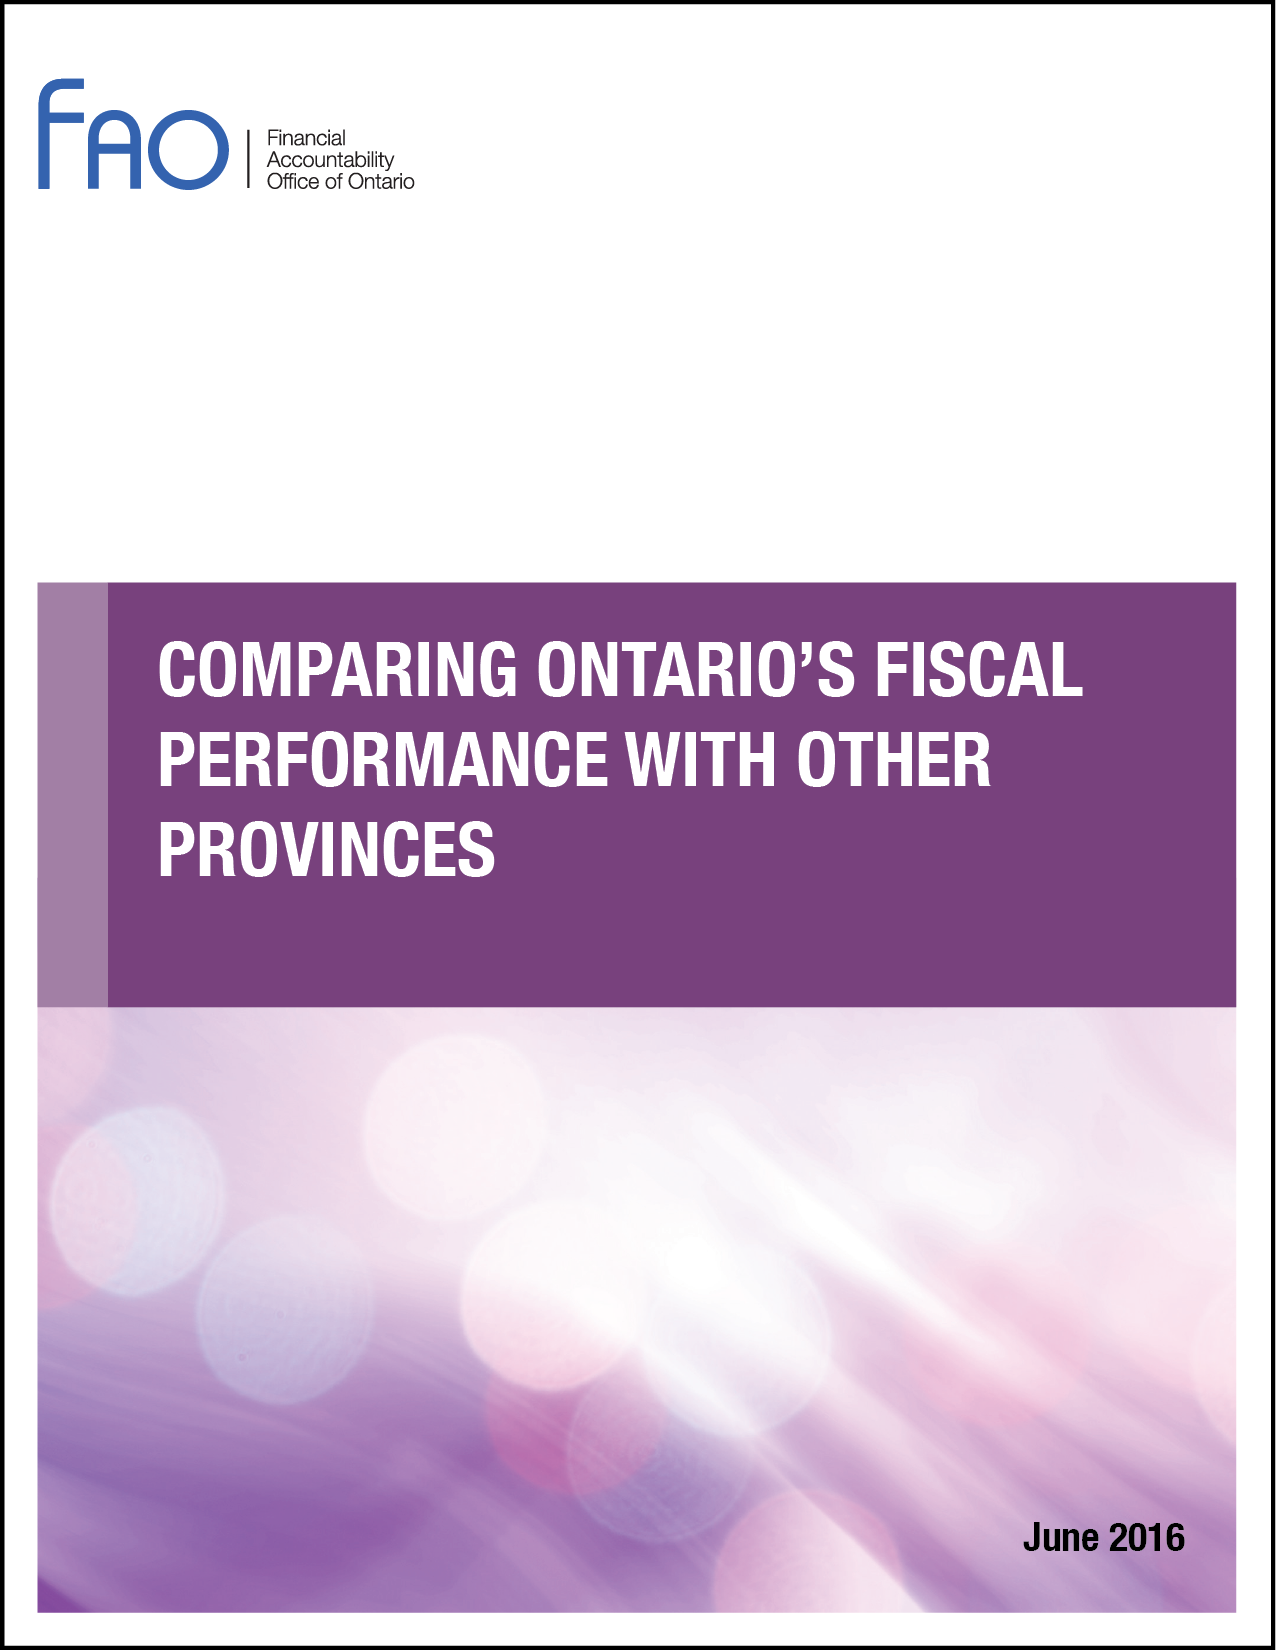 Comparing Ontario’s Fiscal Performance with Other Provinces